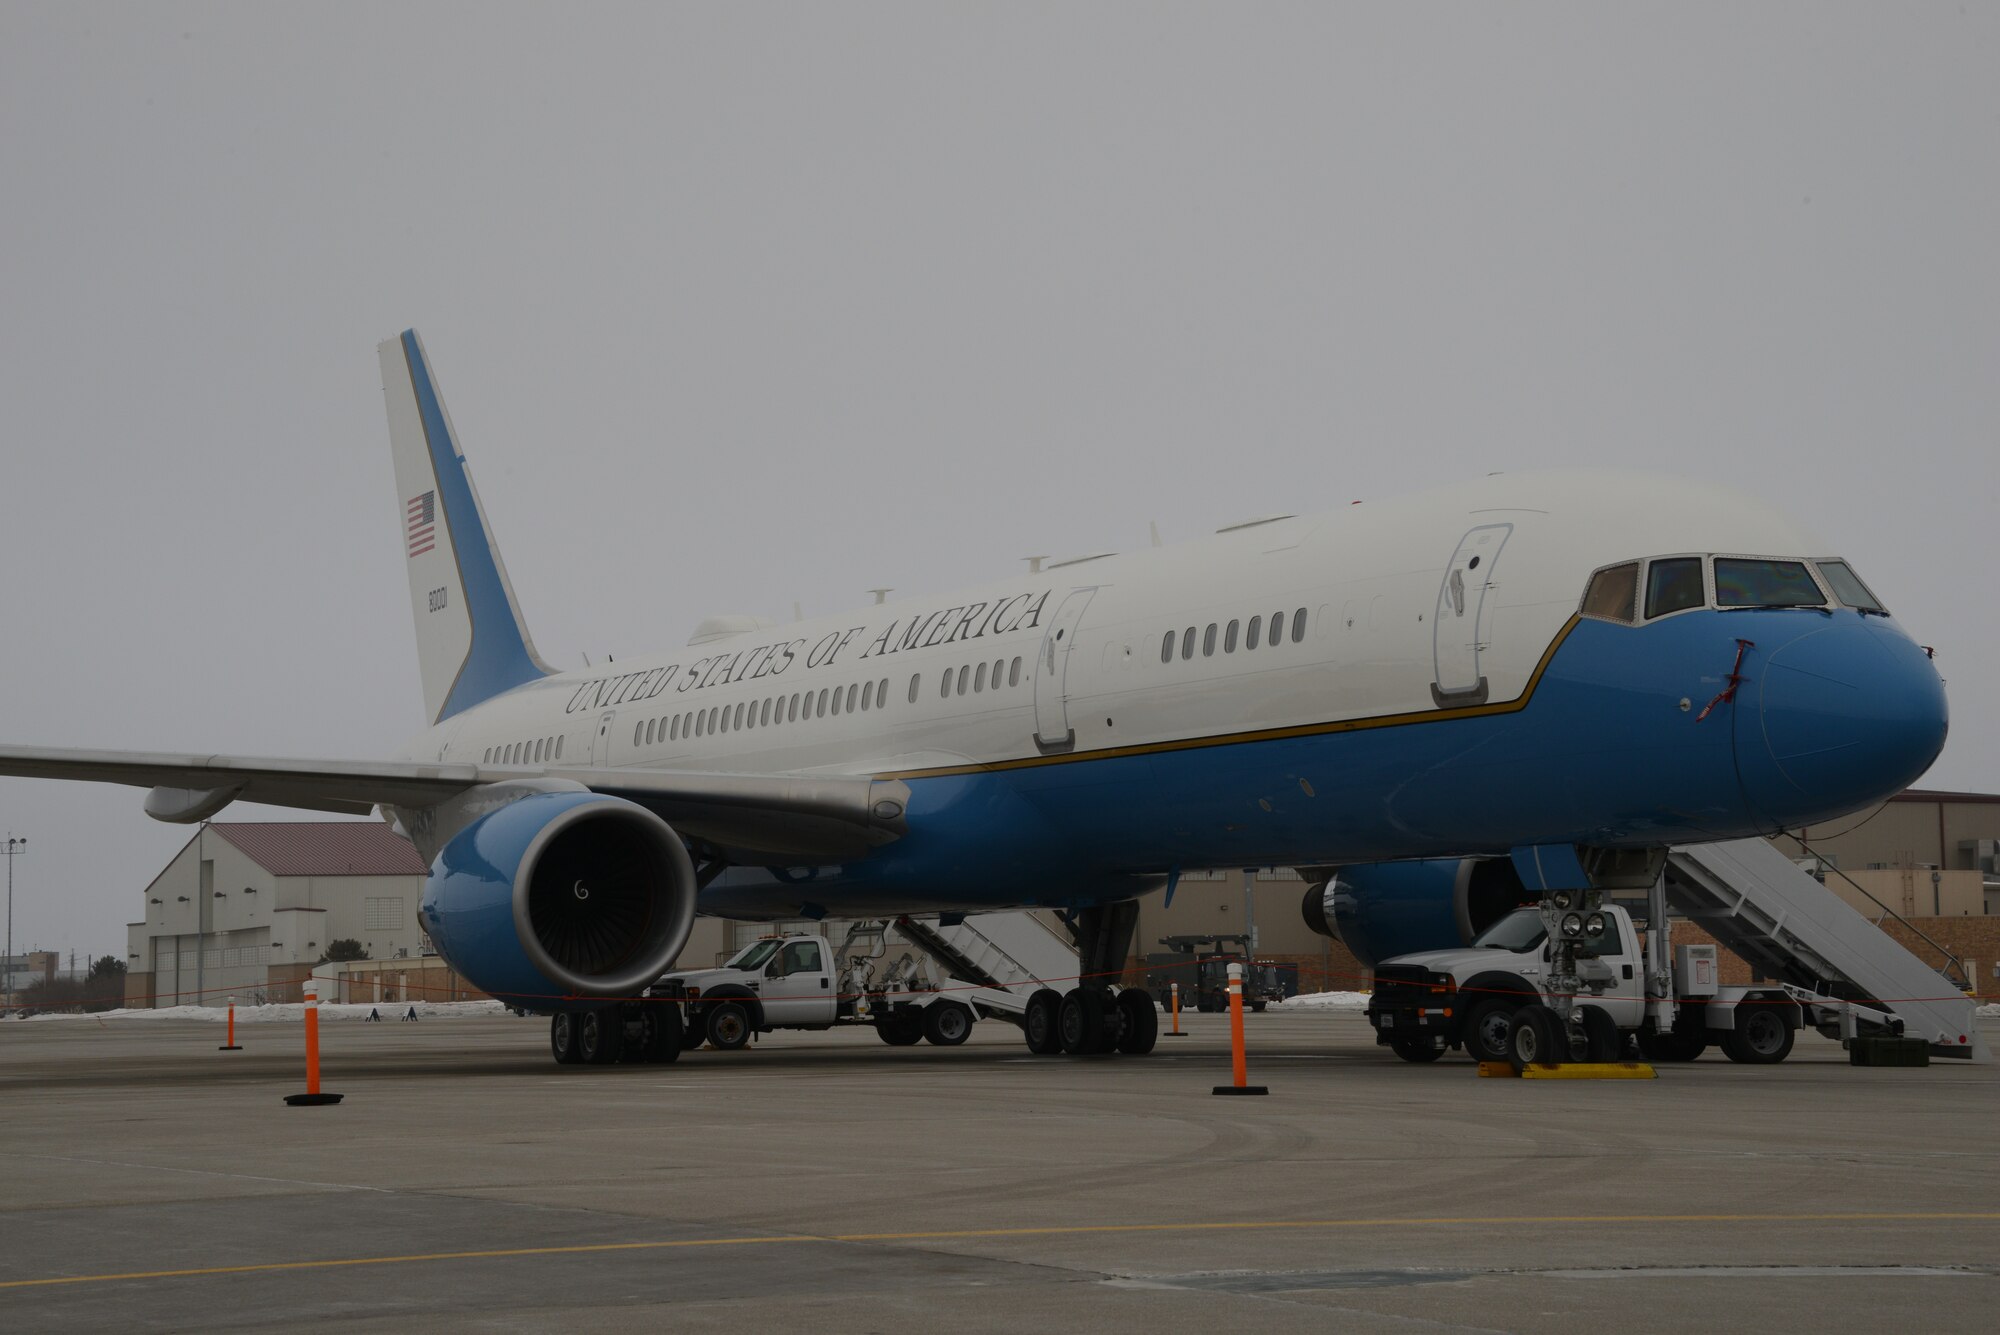 U.S. Air Force C-32 call sign “Air Force Two” on the ramp at the Iowa Air National Guard in Sioux City, Iowa on January 30, 2020